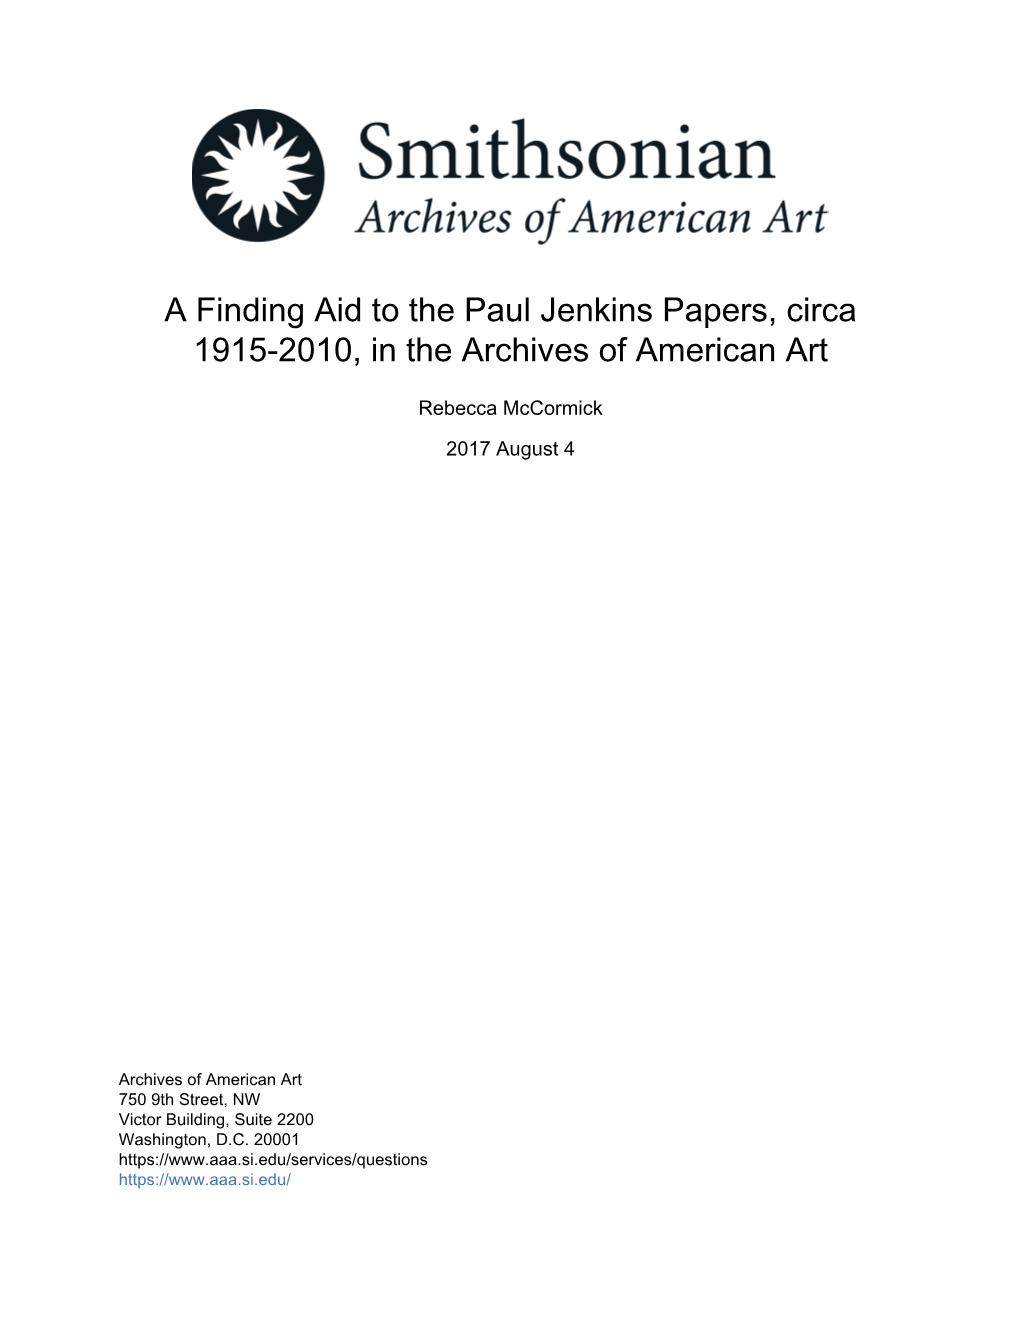 A Finding Aid to the Paul Jenkins Papers, Circa 1915-2010, in the Archives of American Art